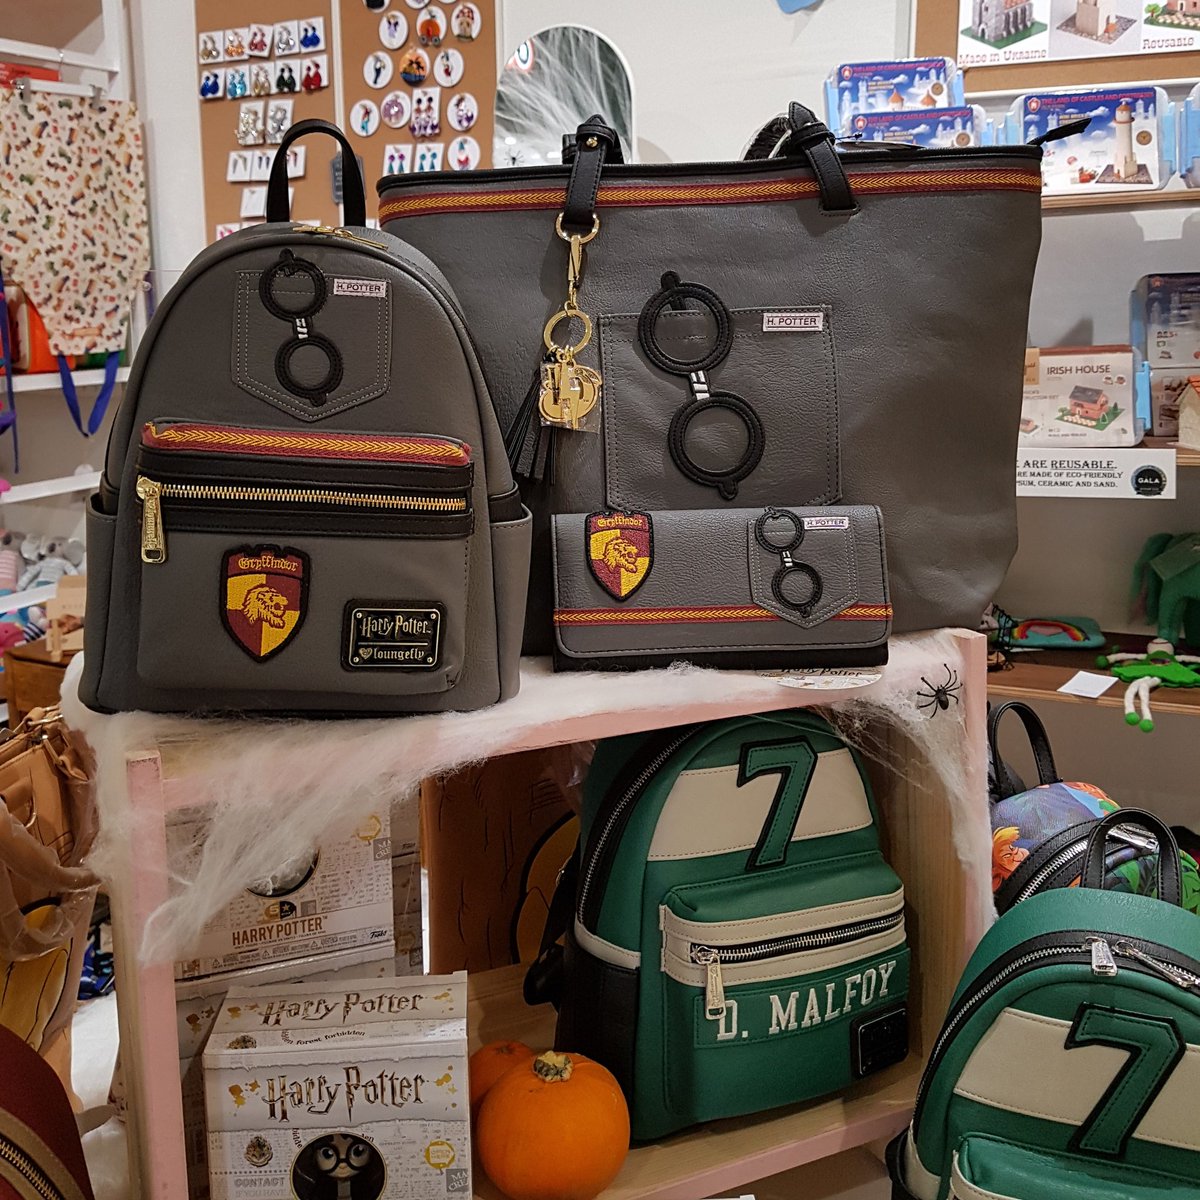 Harry Potter Backpacks & Wallets are back in stock. Be quick! They won't last long! 😳
#harrypotterfan #harrypottergift #harrypotter #backpacks #wallets #kidstore #kidsgiftideas #teengifts #teens #kidlife #teenlife #womens #loungefly #quirkystuff #quirky #backinstock